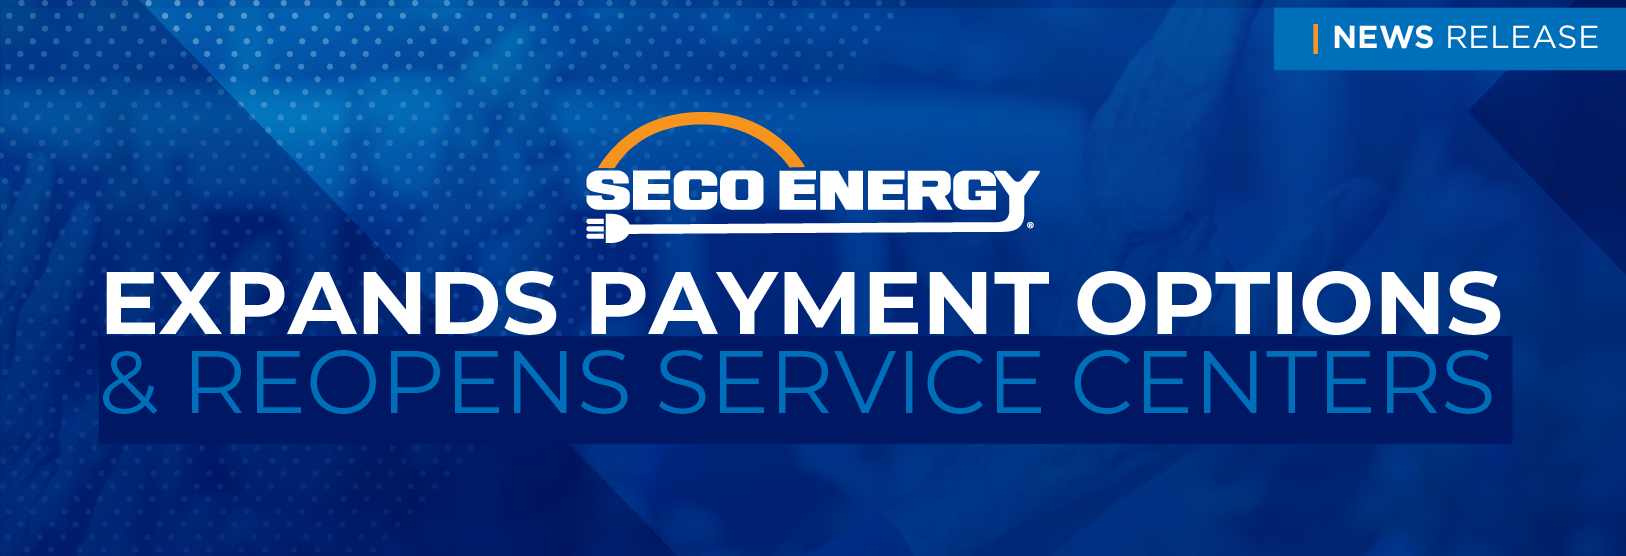 SECO Energy Expands Payment Options & Reopens Service Centers